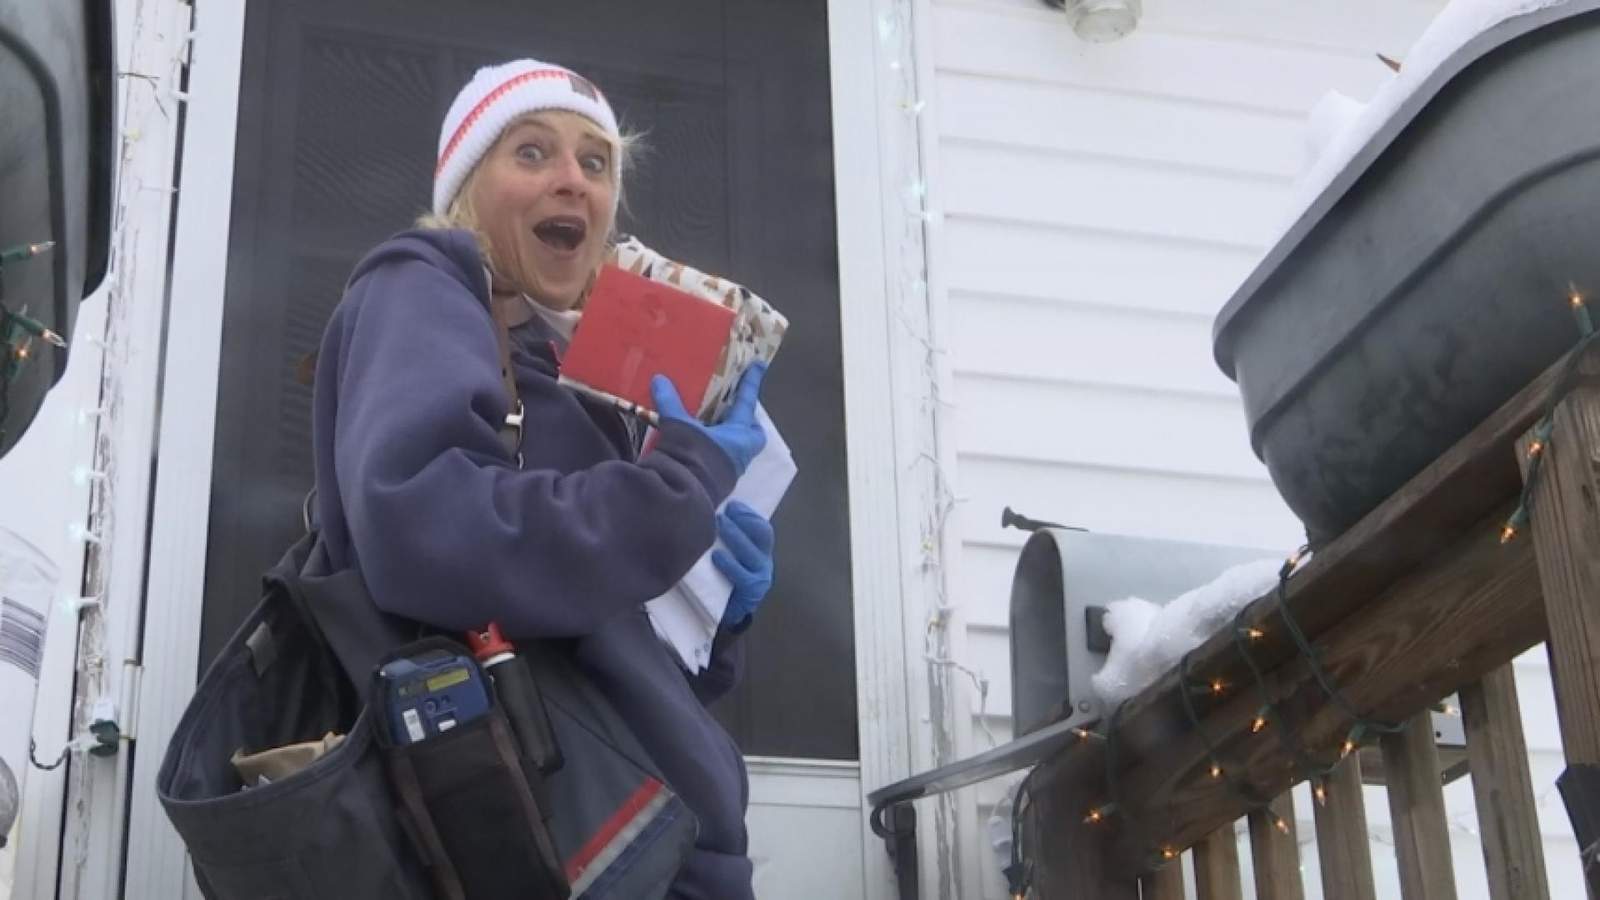 Mail carrier treated to the ‘12 Days of Christmas’